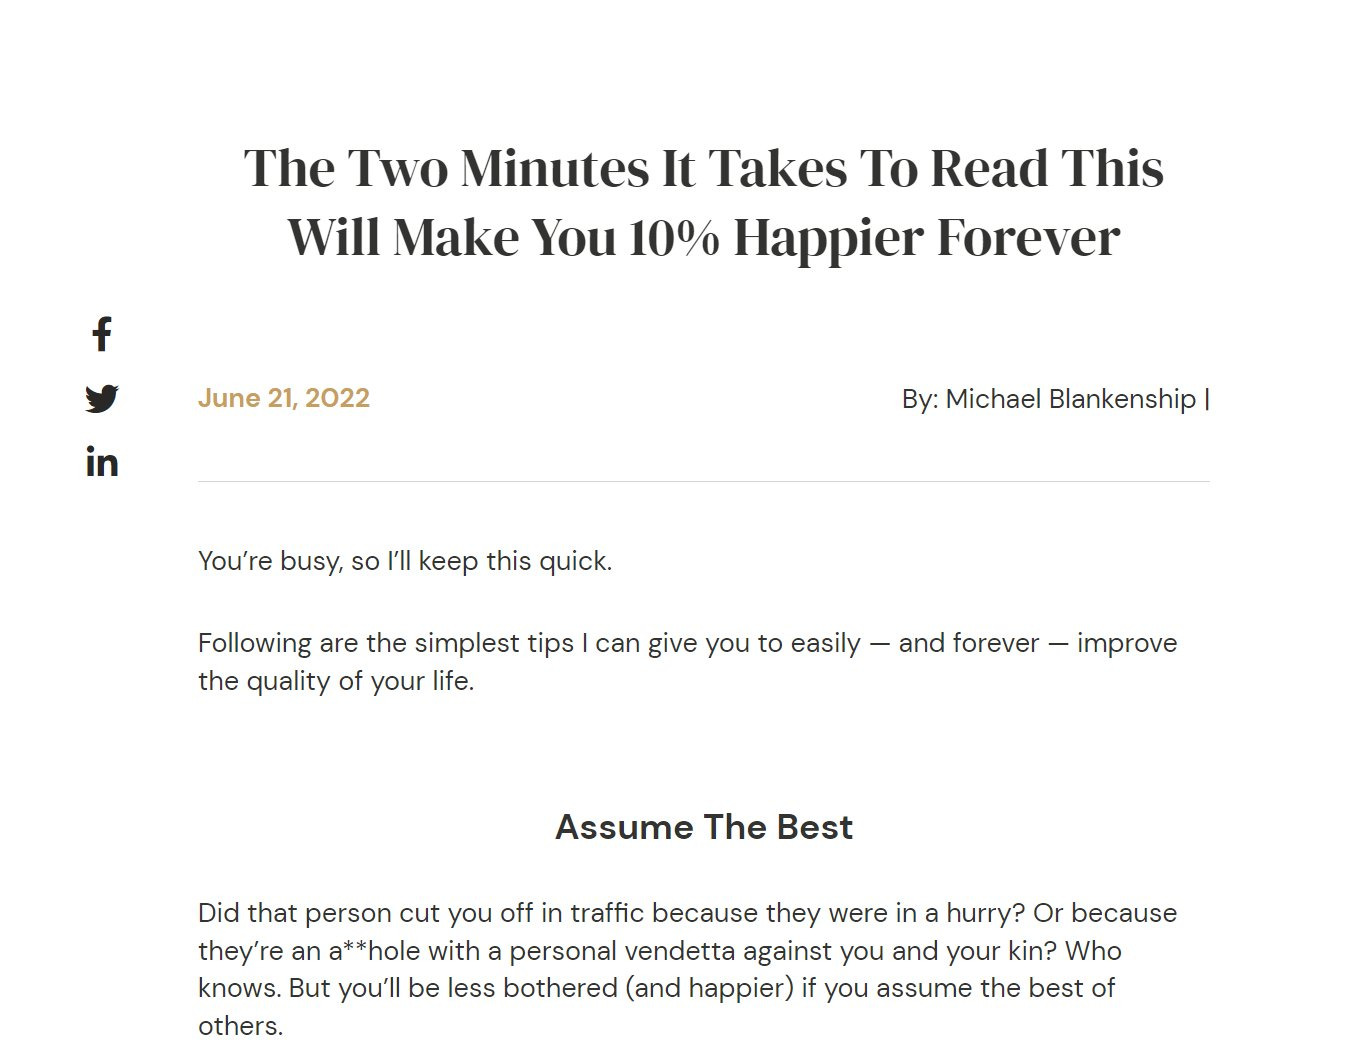 The Tonic's guide to being 10% happier forever